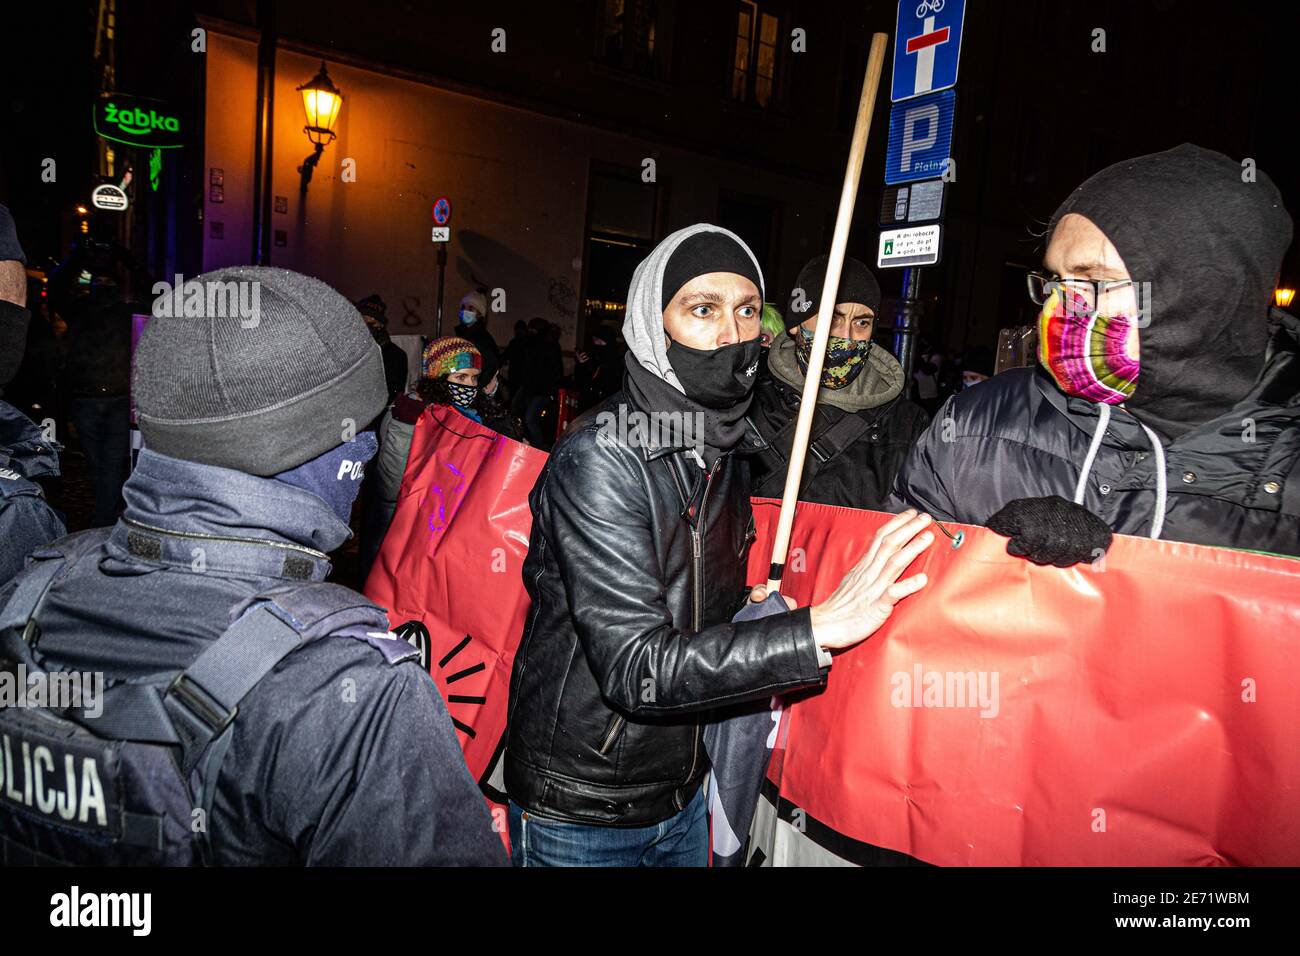 Wroclaw, Poland. 29th Jan, 2021. Jan 29, 2021 Poland, Wroclaw. Massive protests across the country against the ruling of the Constitutional Tribunal banning eugenic abortion in Poland. Credit: Krzysztof Kaniewski/ZUMA Wire/Alamy Live News Stock Photo